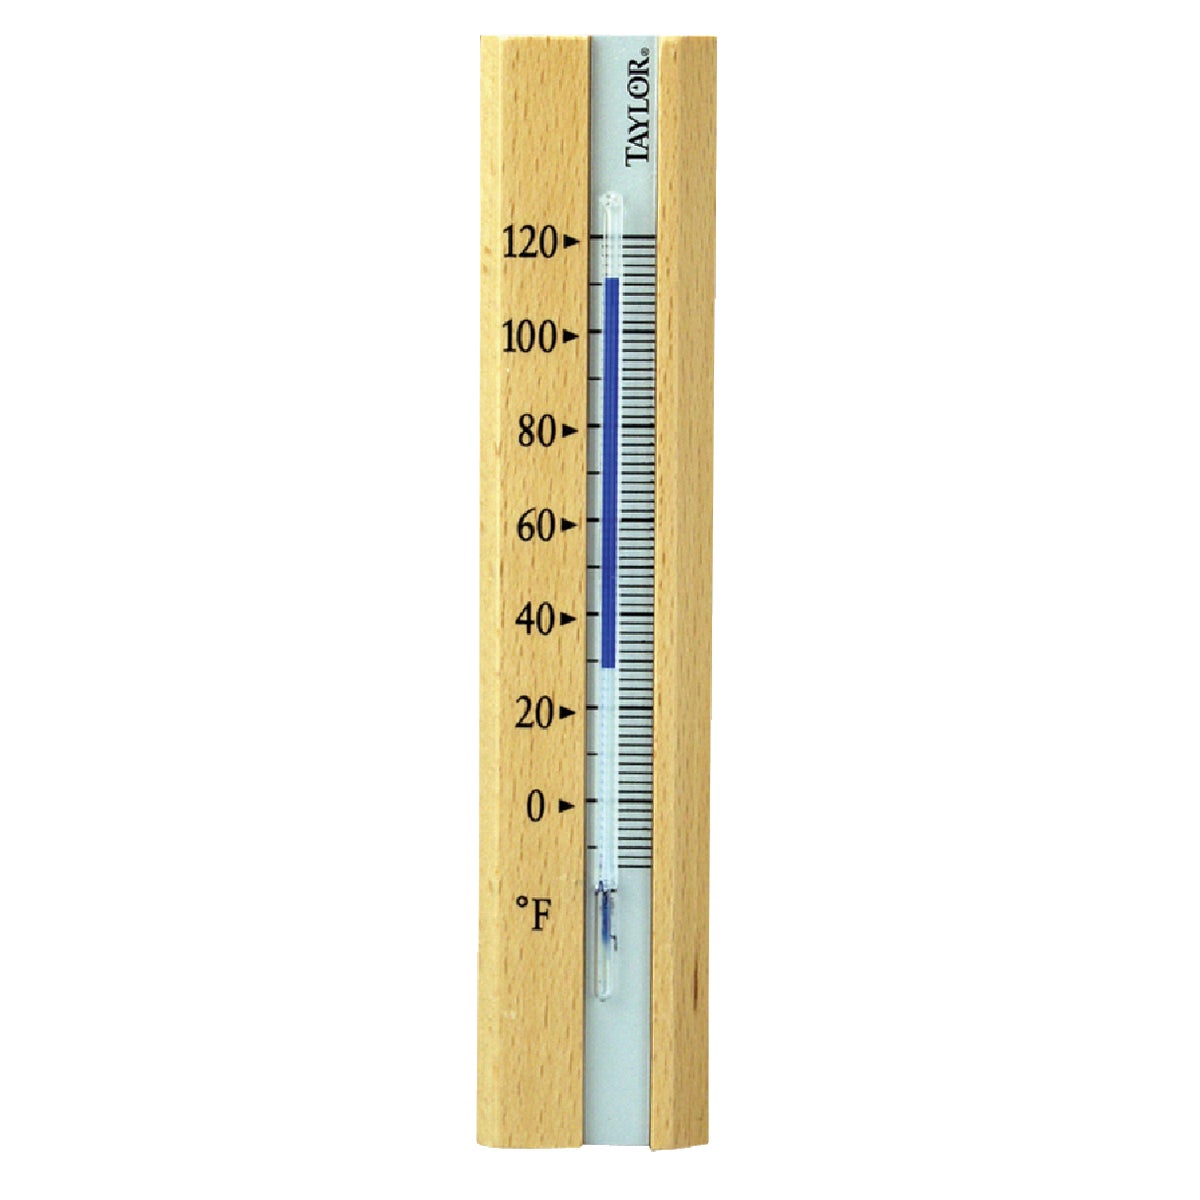 Item 639599, Neutral natural stain on all-wood thermometer. Aluminum insert.